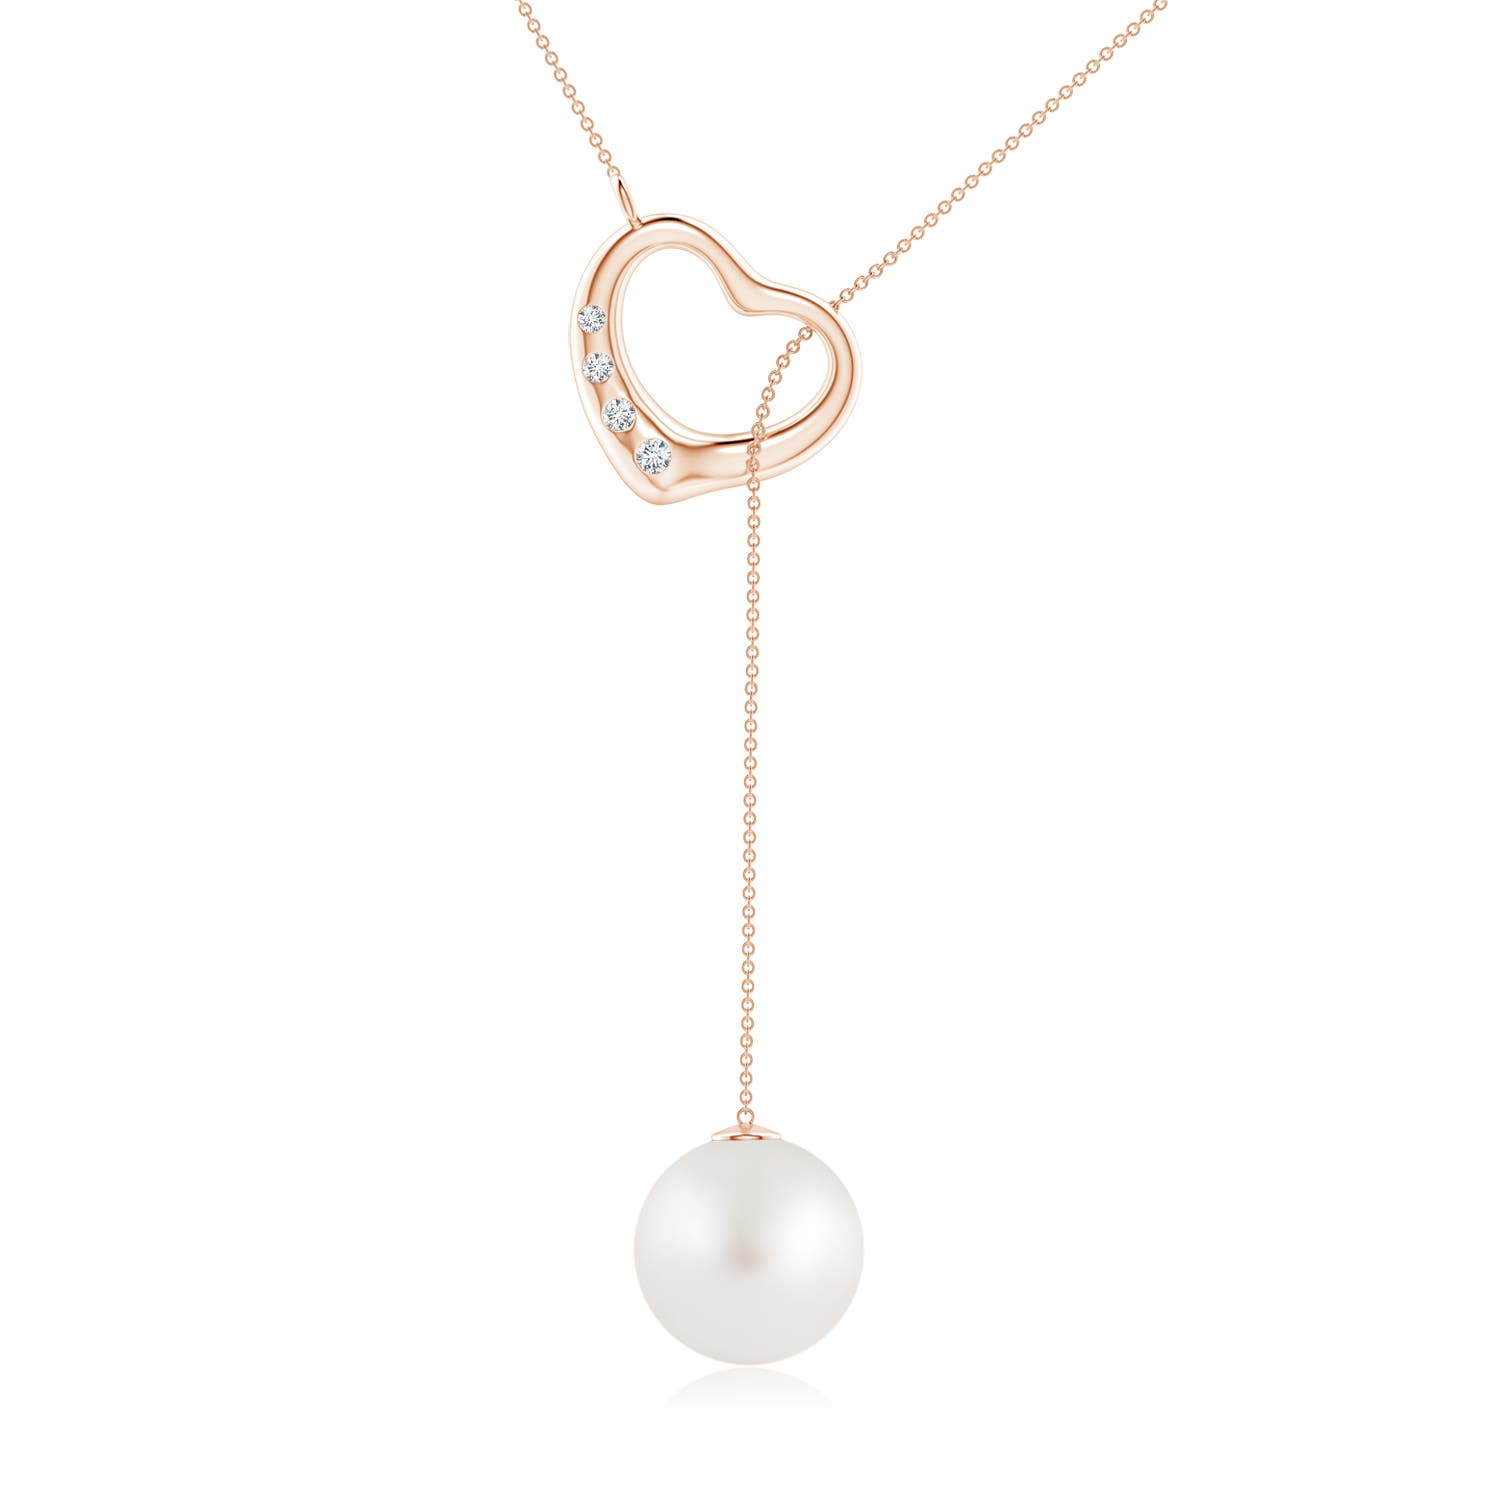 AA - South Sea Cultured Pearl / 7.23 CT / 14 KT Rose Gold